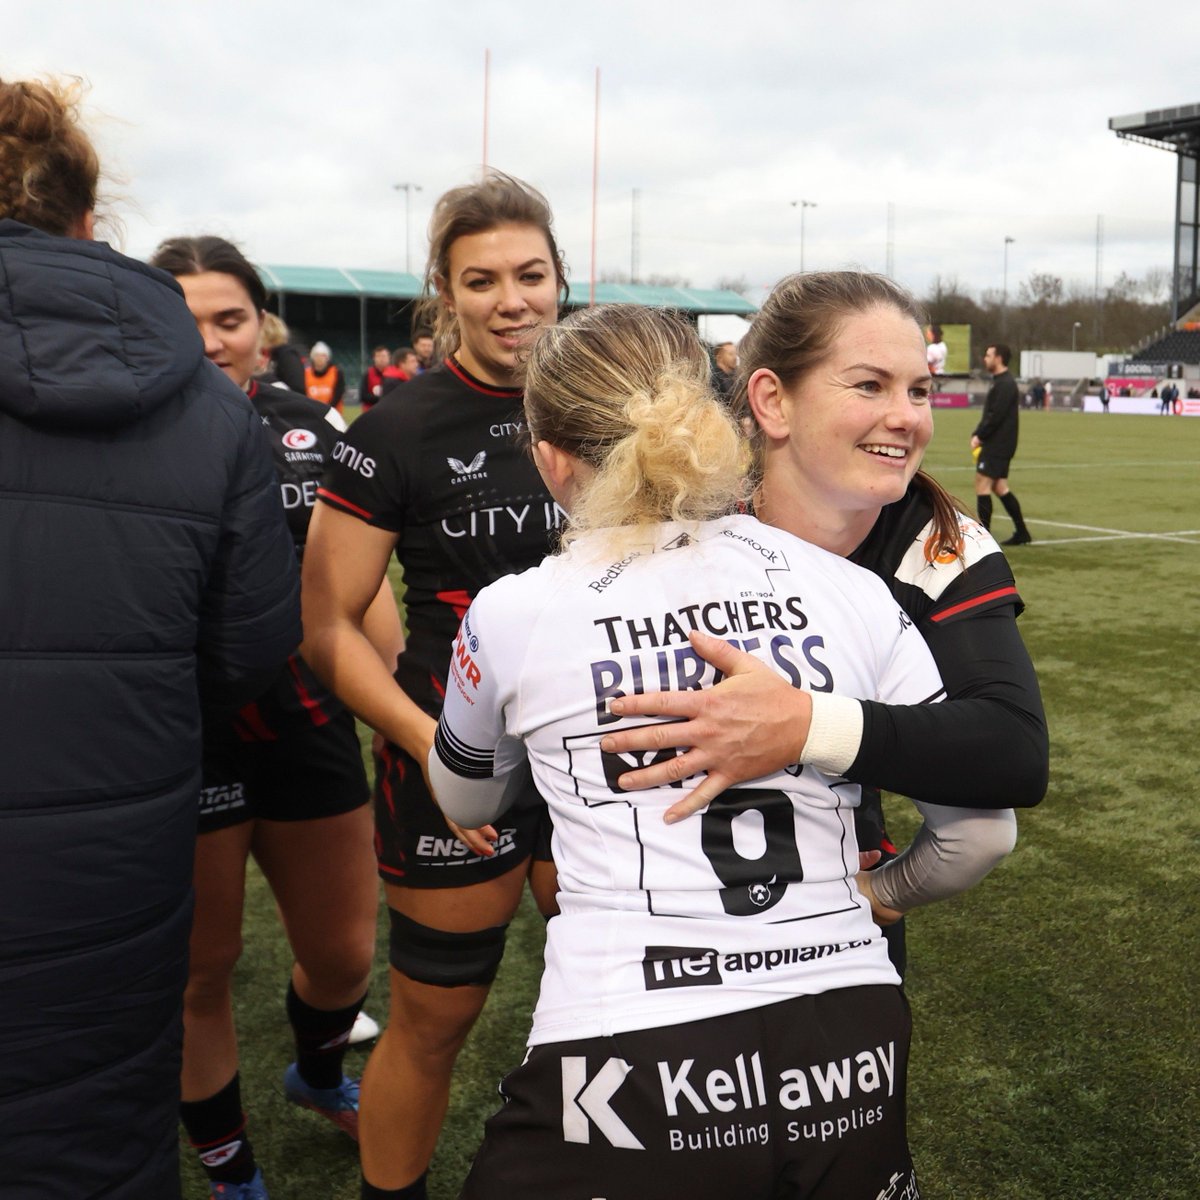 Confirmation that we'll play @BristolBearsW in the #AllianzCup final on Sunday 2️⃣8️⃣ April at Shaftesbury Park. #YourSaracens💫